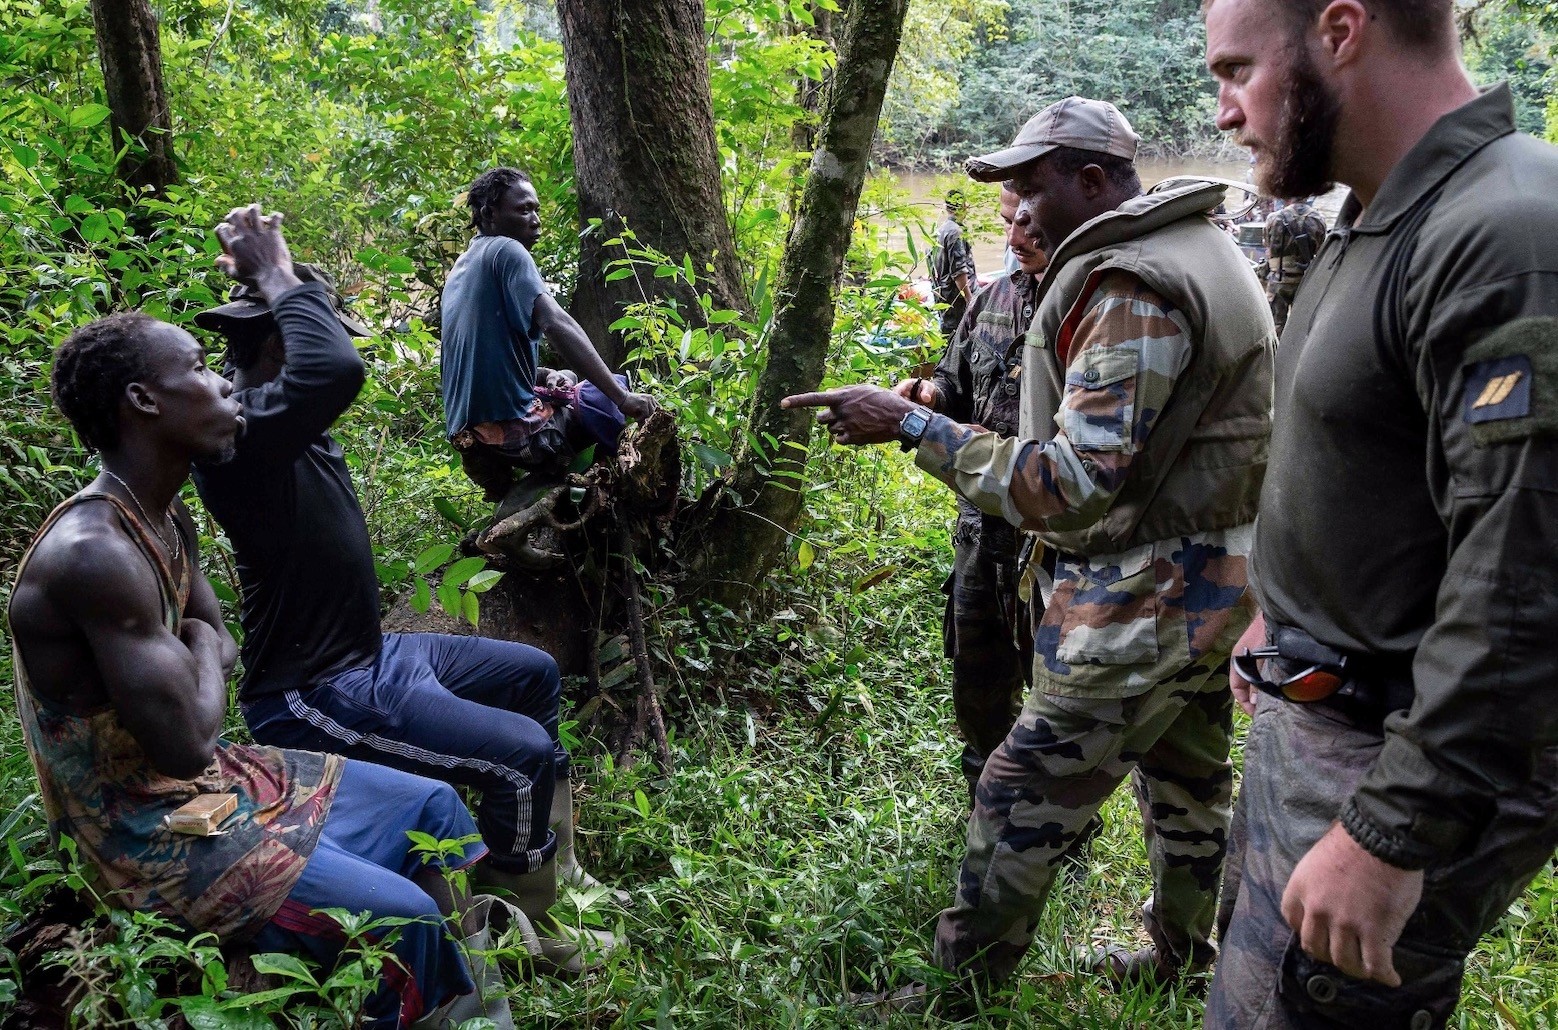 Members of the 9th Marine Infantry Regiment ust caught three illegal gold panners on a path in the jungle as part of the Harpie Operation conducted by French Guiana Armed Forces and gendarmes to fight illegal gold panning in French Guiana, Jan. 20.